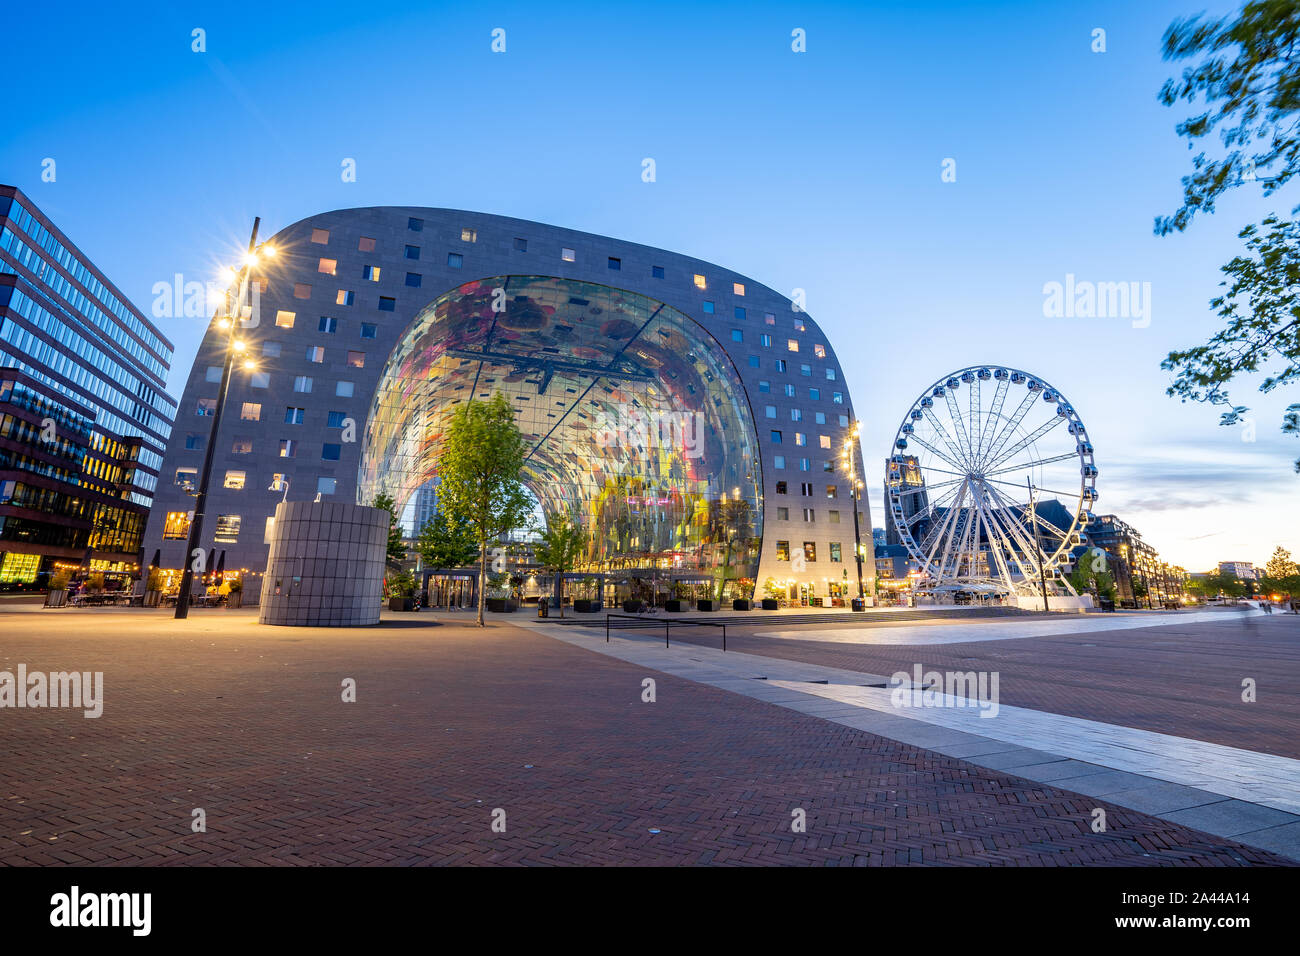 Rotterdam, Netherlands - May 13, 2019: View of Markthal at night in Rotterdam city, Netherlands. Stock Photo